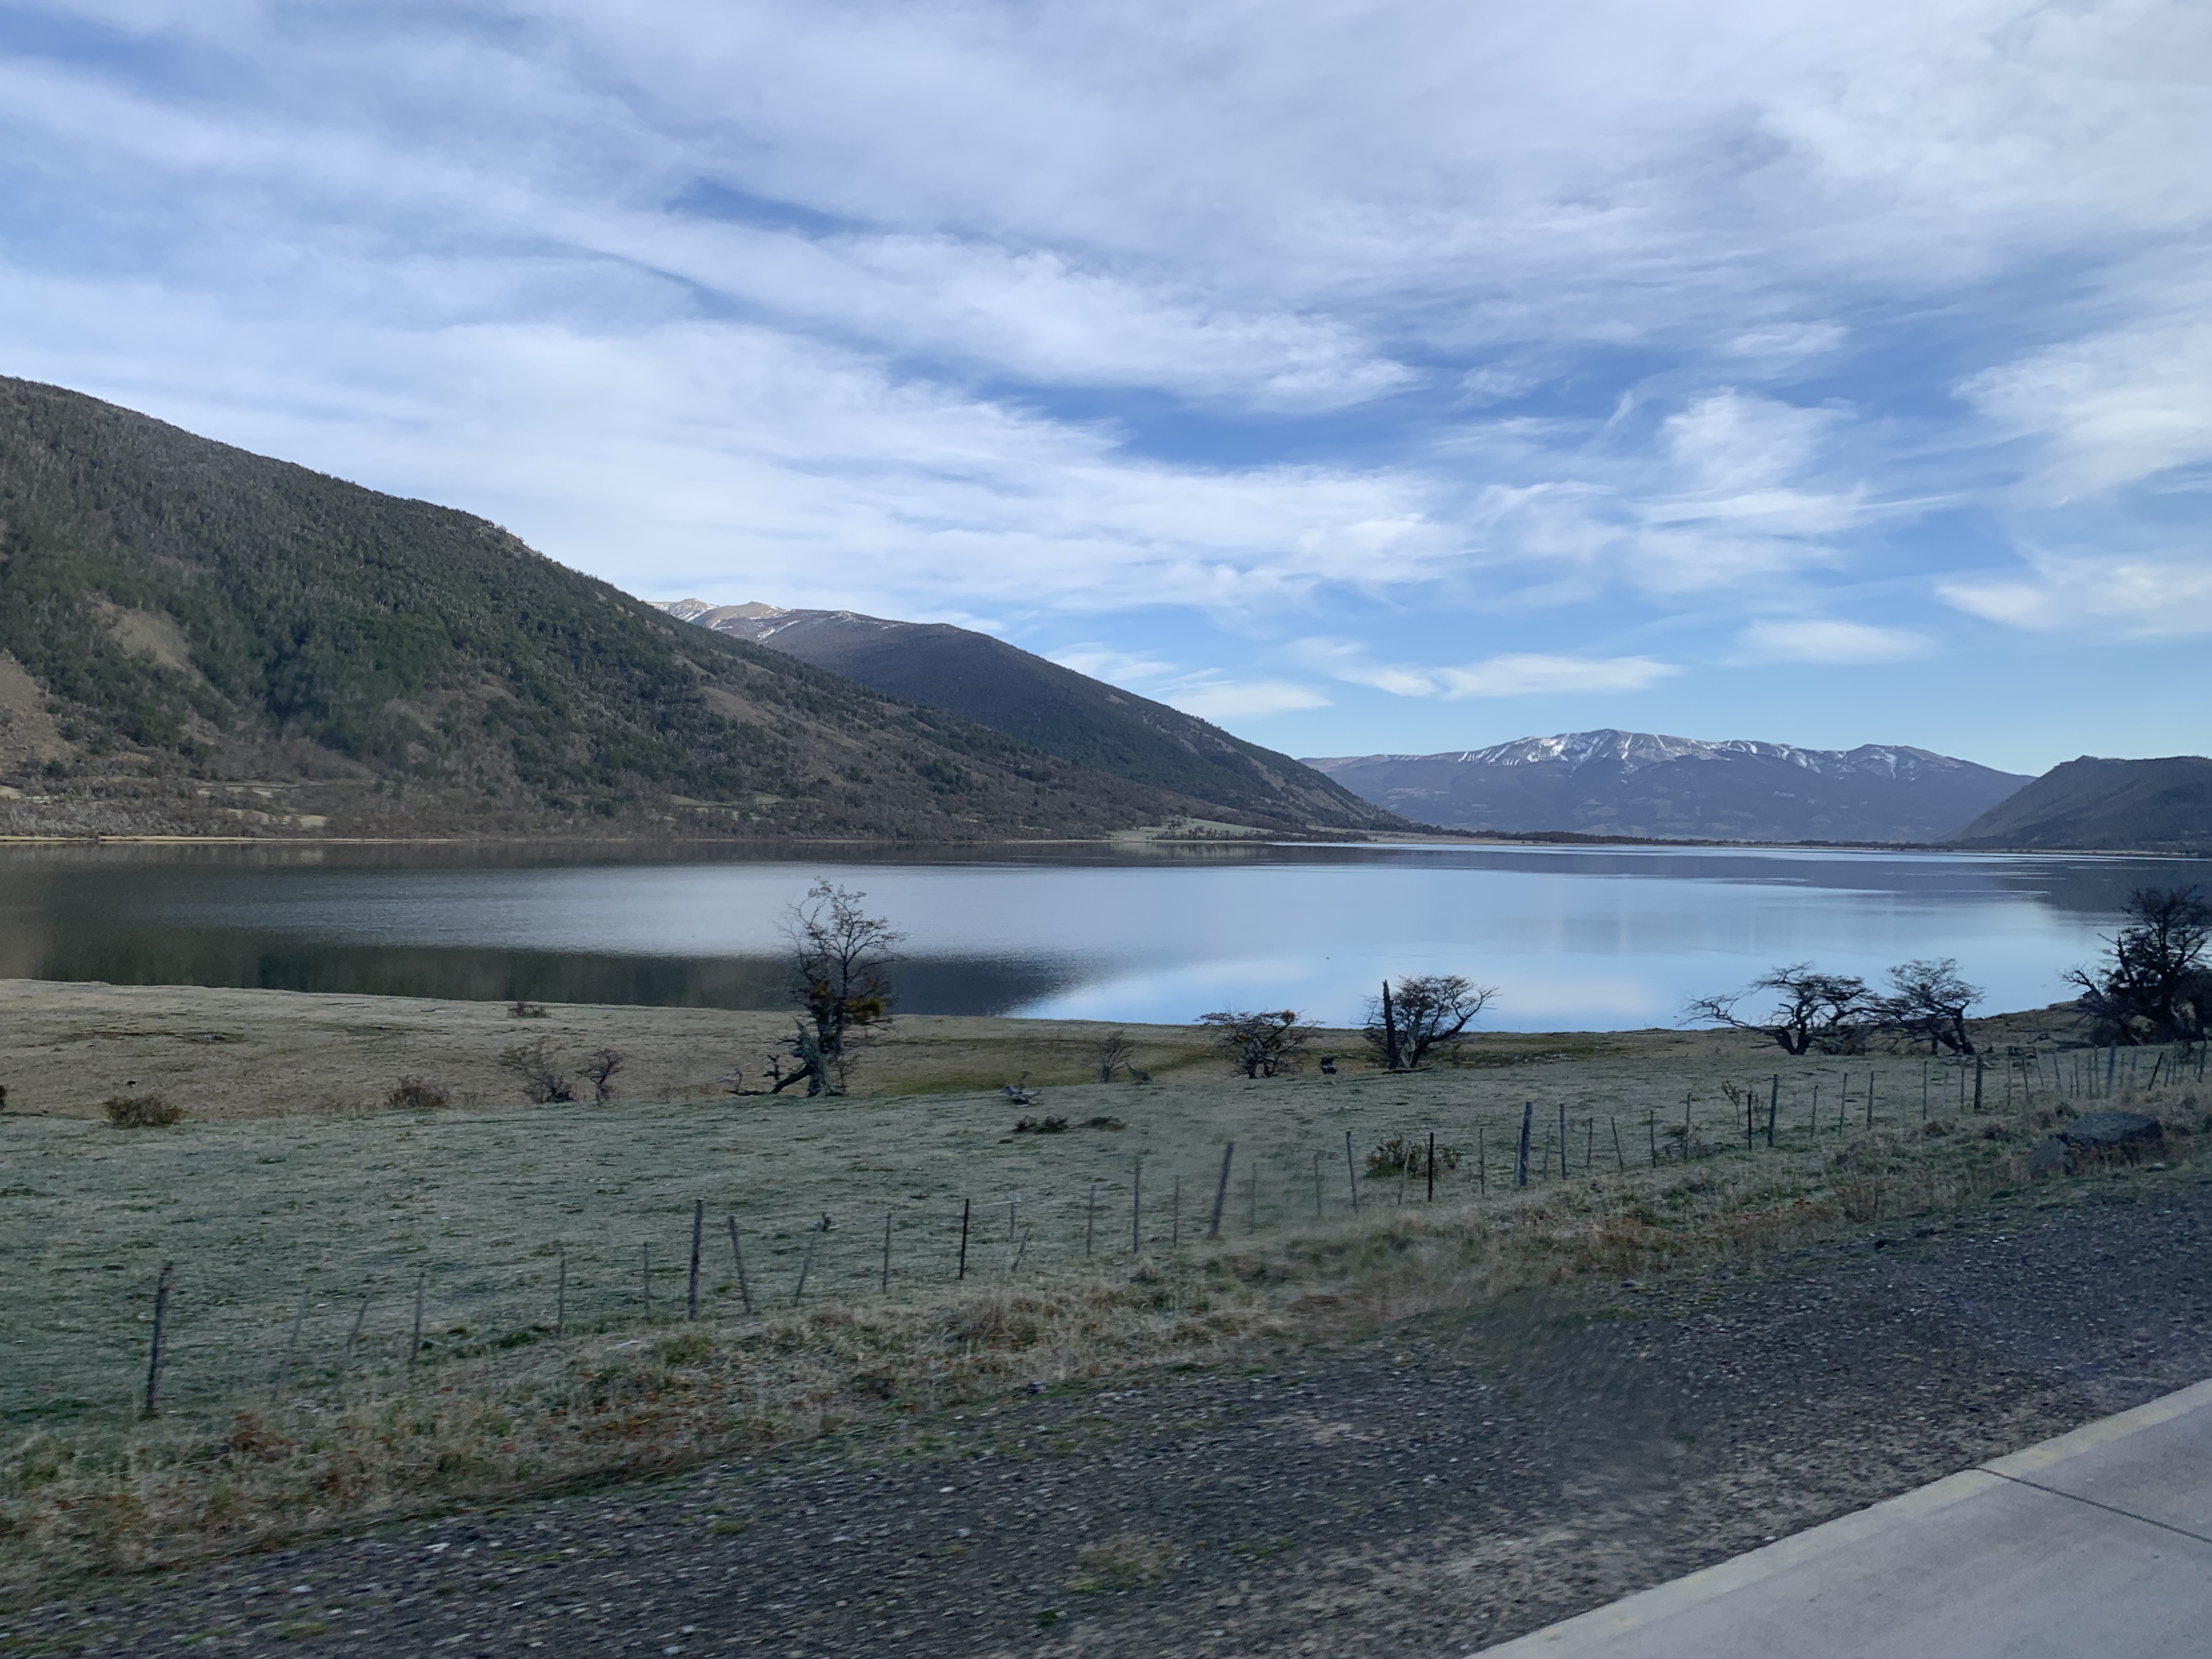 Overland by Bus: Puerto Natales, Chile, to El Calafate, Argentina